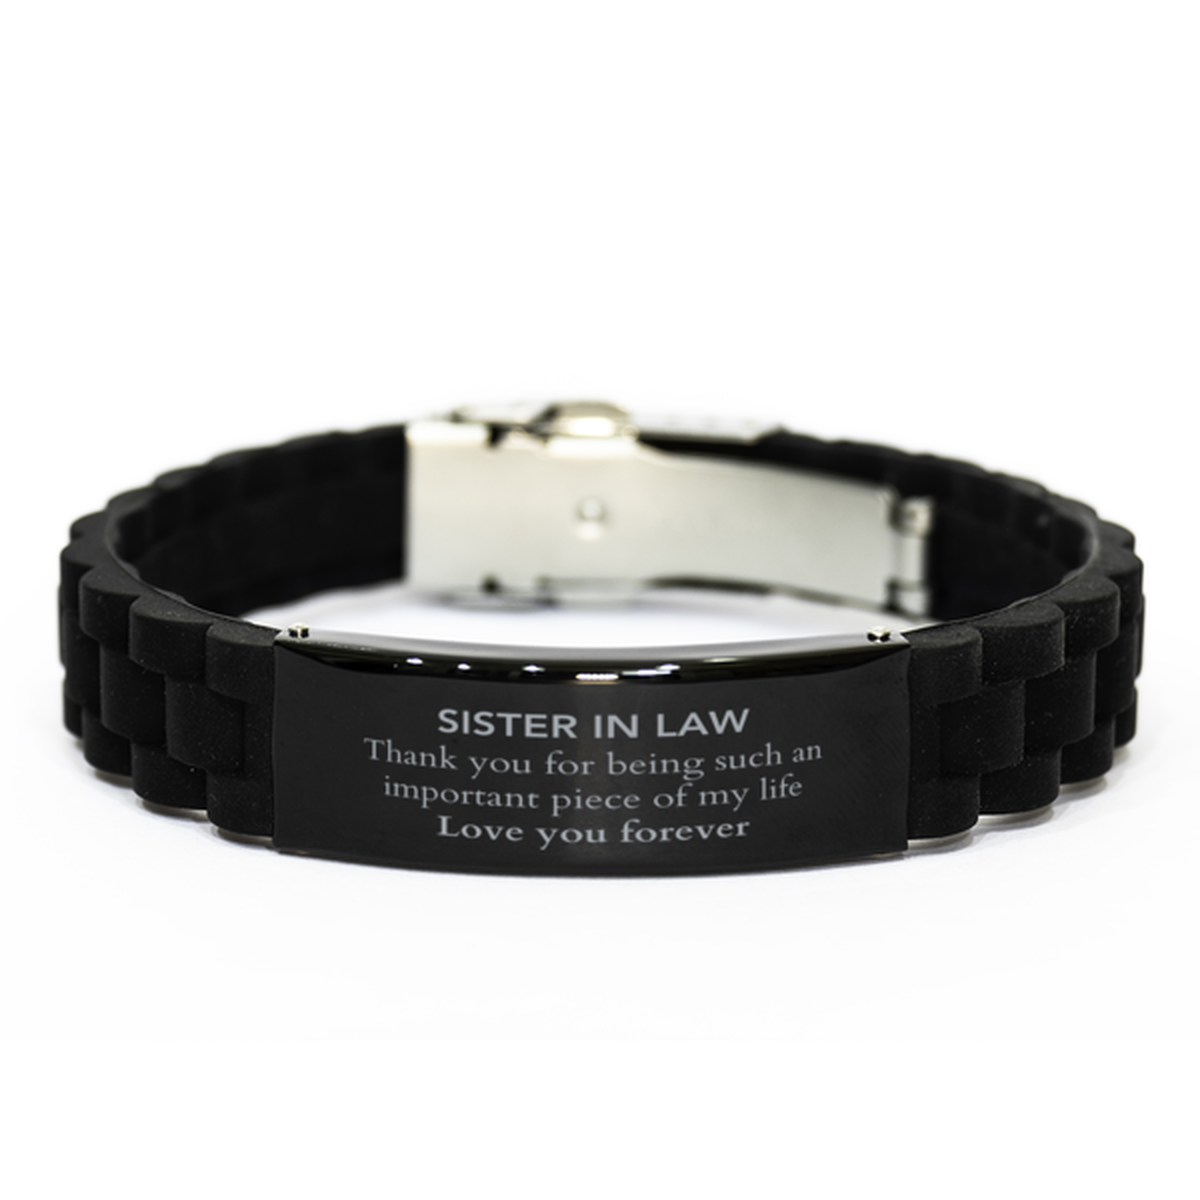 Appropriate Sister In Law Black Glidelock Clasp Bracelet Epic Birthday Gifts for Sister In Law Thank you for being such an important piece of my life Sister In Law Christmas Mothers Fathers Day